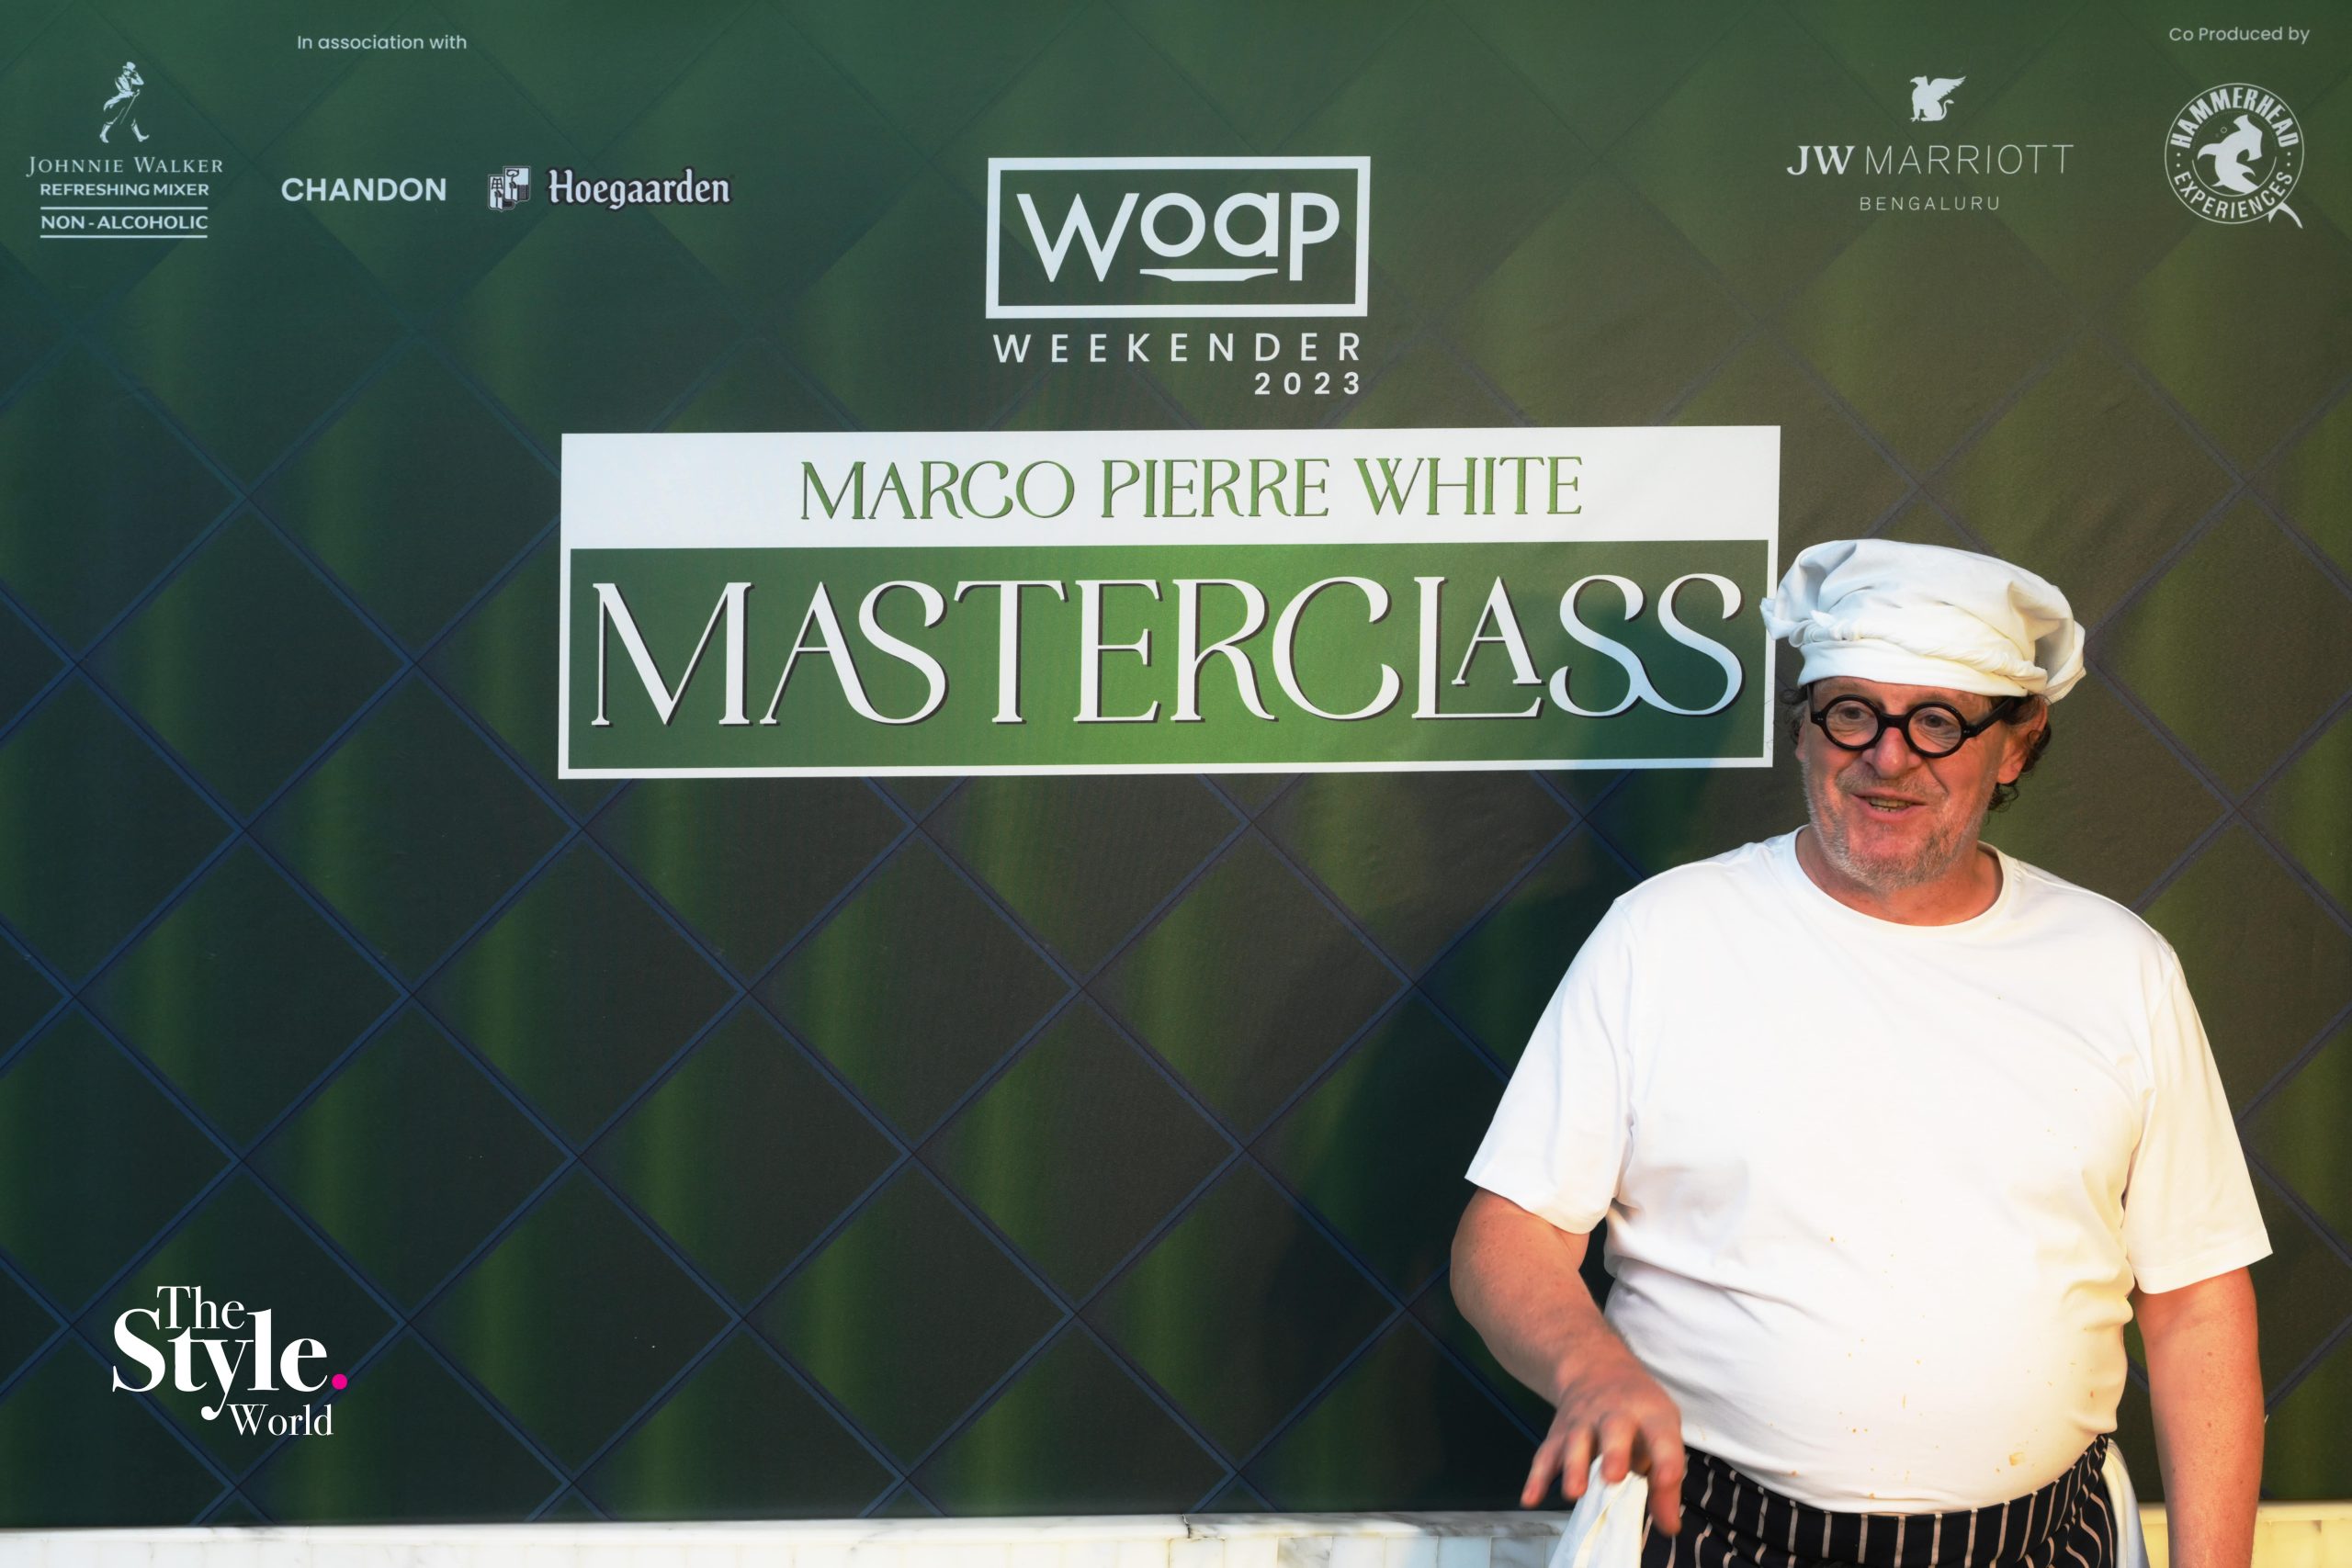 Marco Pierre White: A Culinary Maverick With A Pinch of Humor